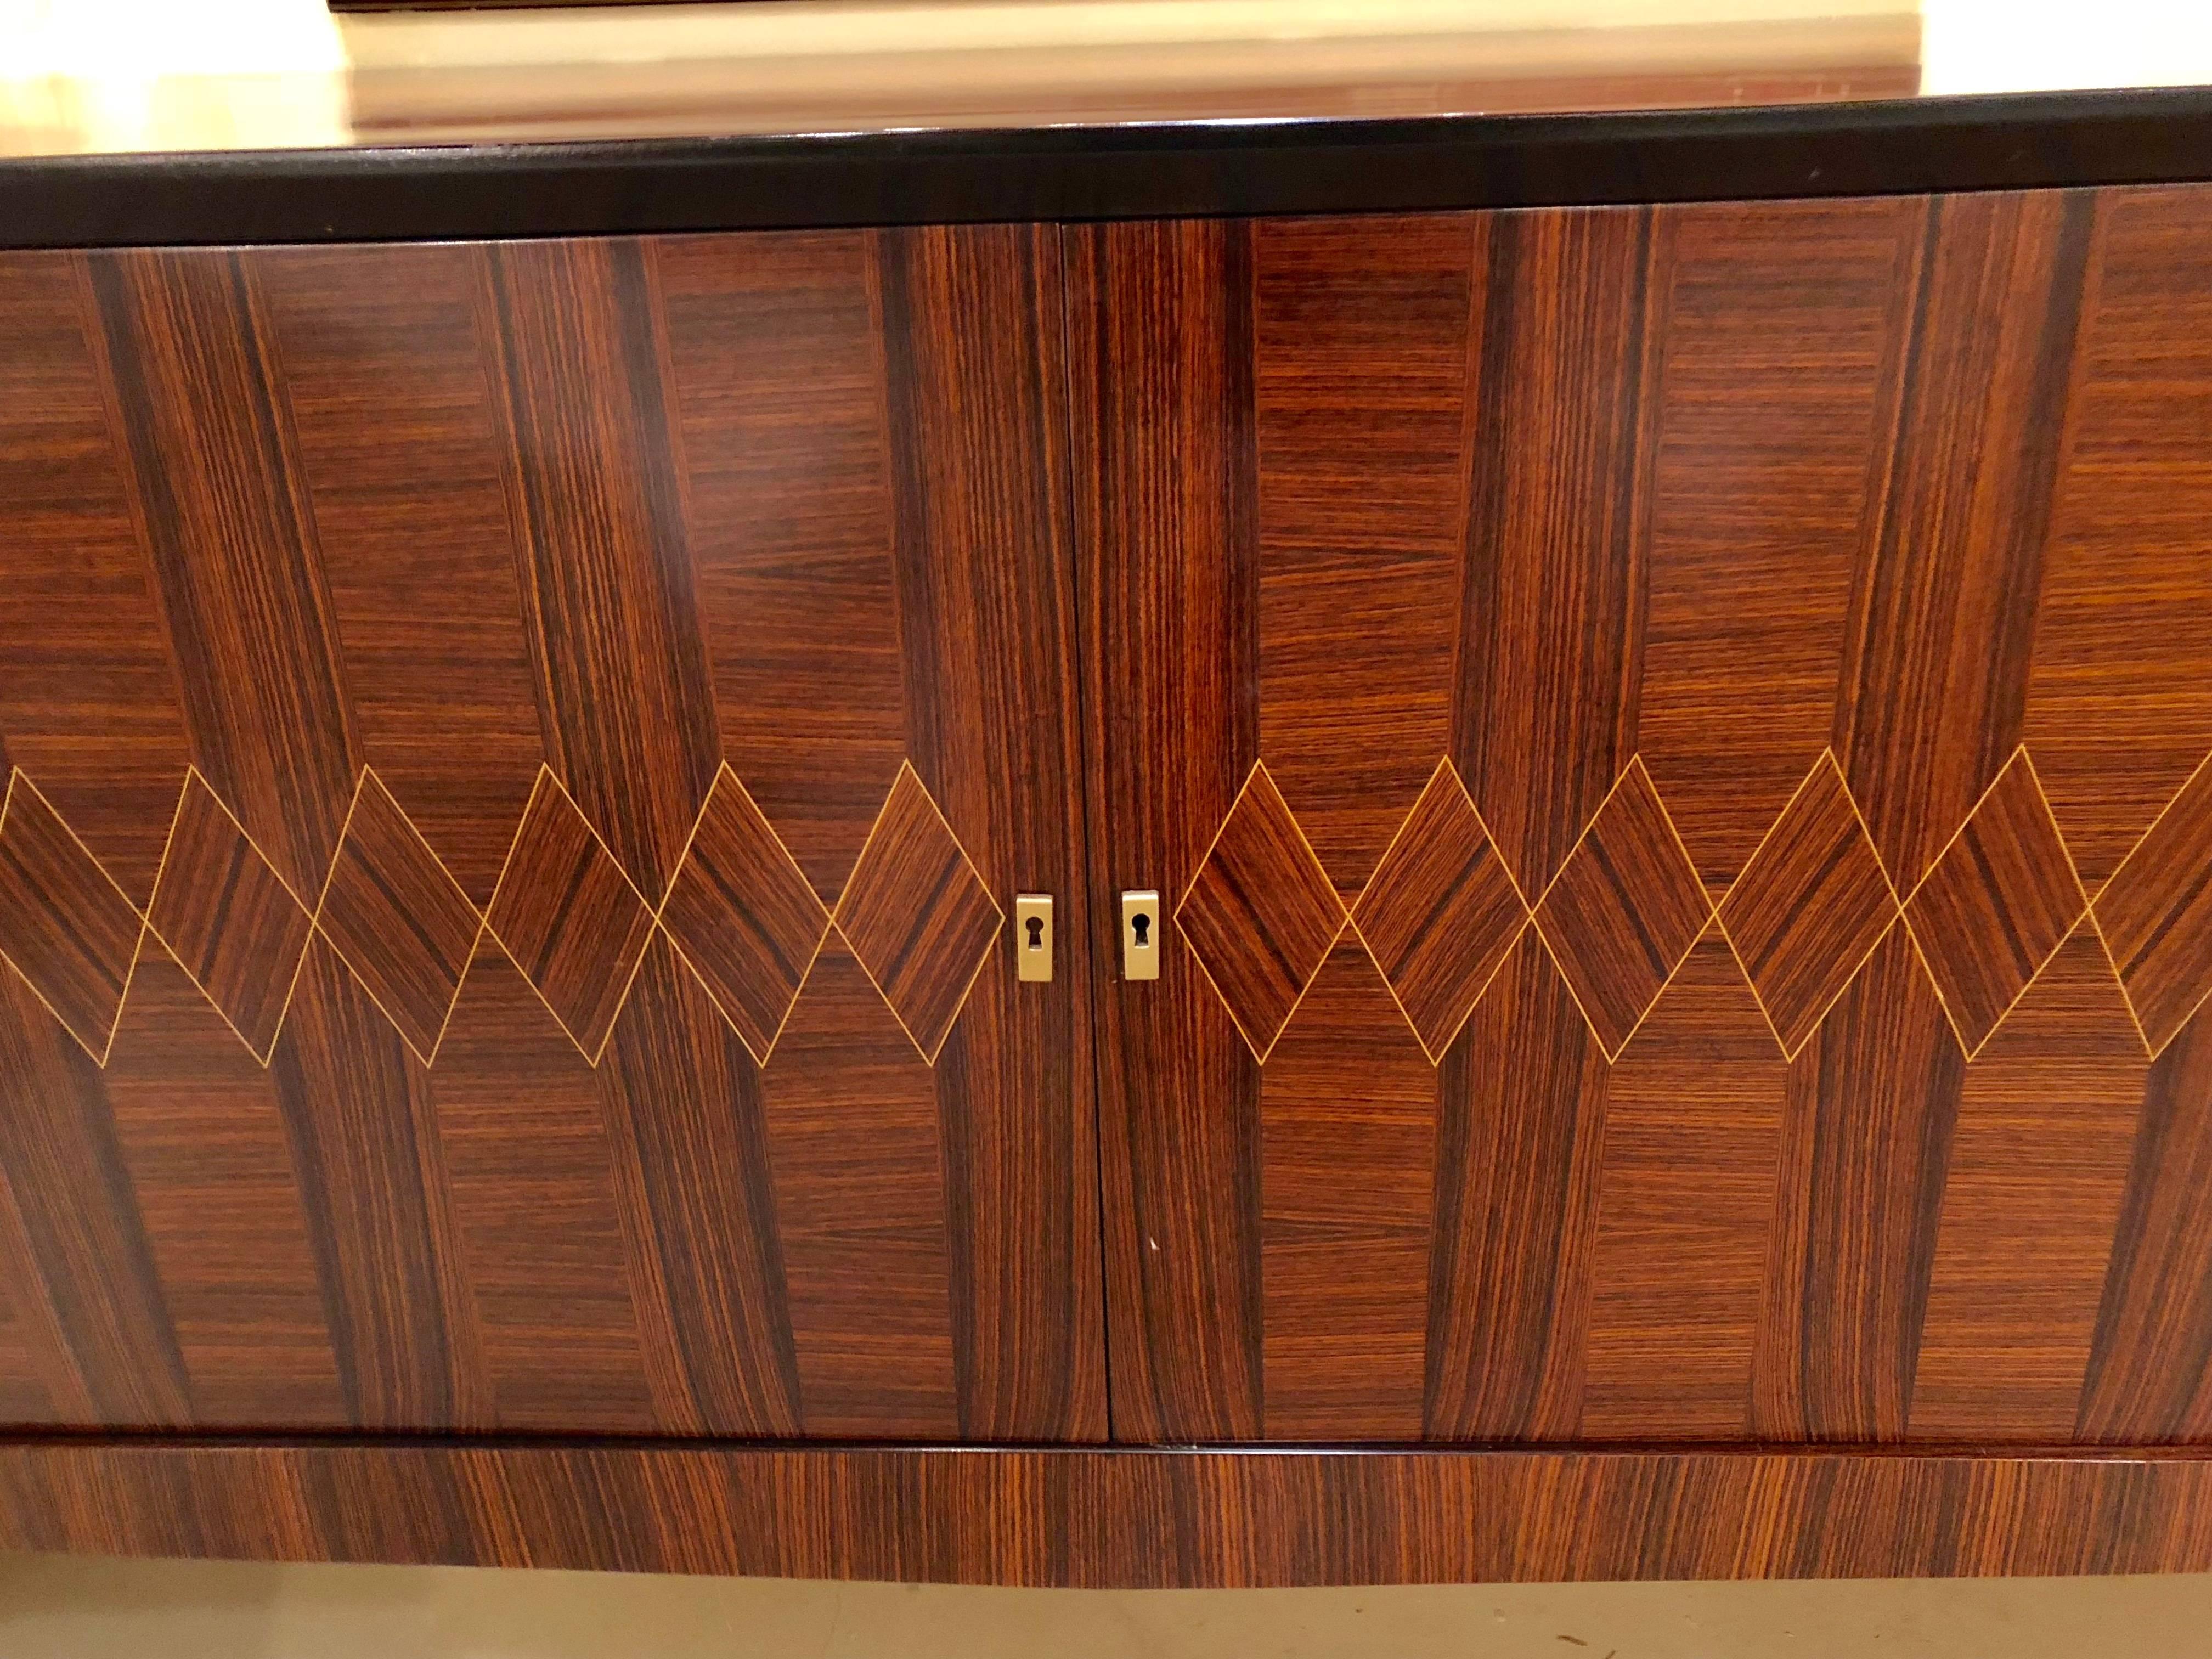 20th Century Monumental Art Deco Macassar and Inlaid Sideboard Credenza with Glass Shelves